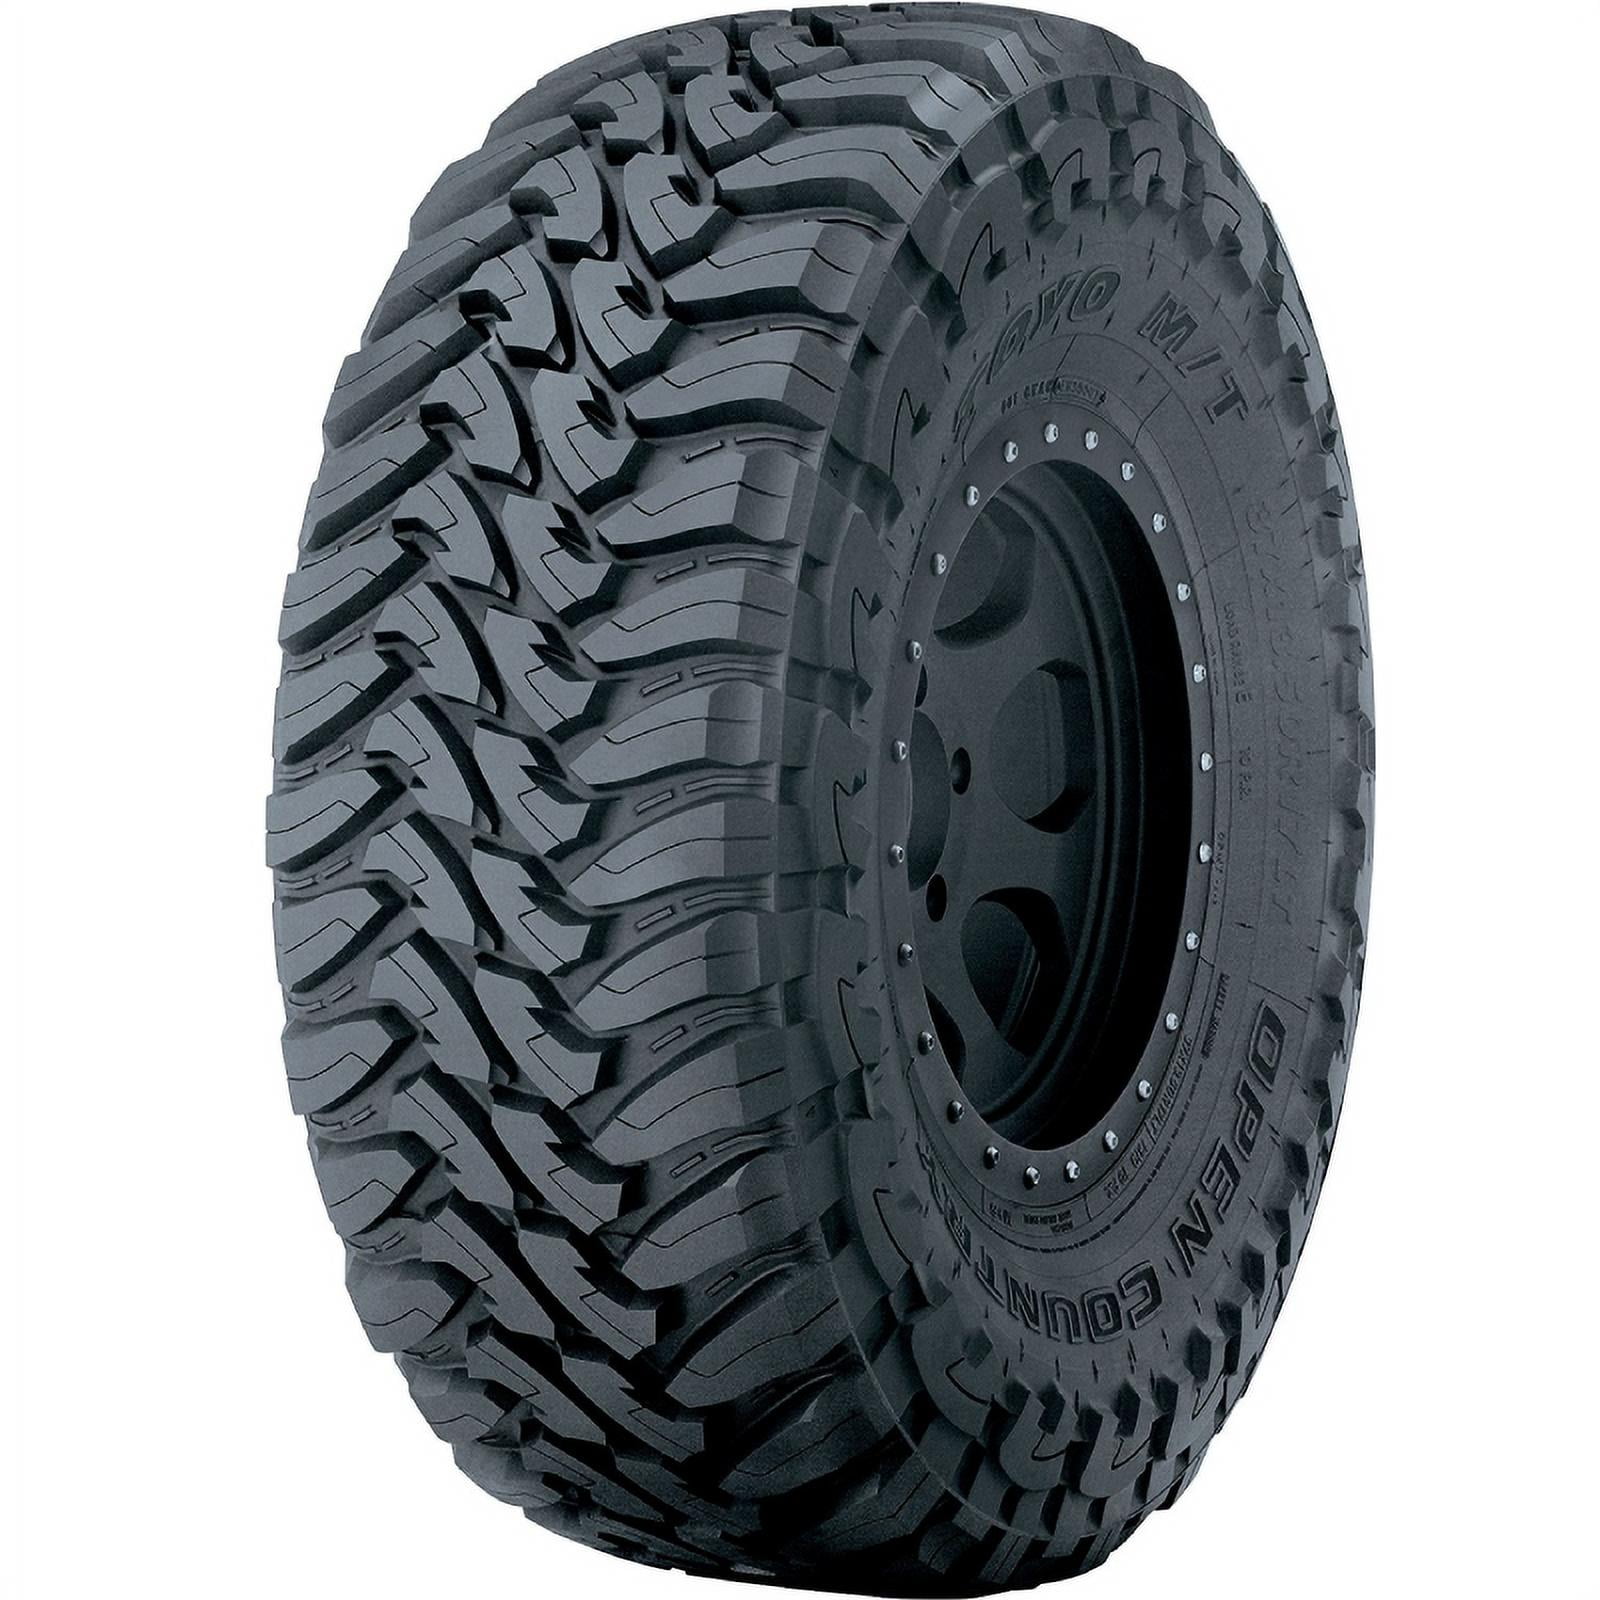 Toyo Open Country M/T LT285/70r17 121P E (10 ply) BW Tire